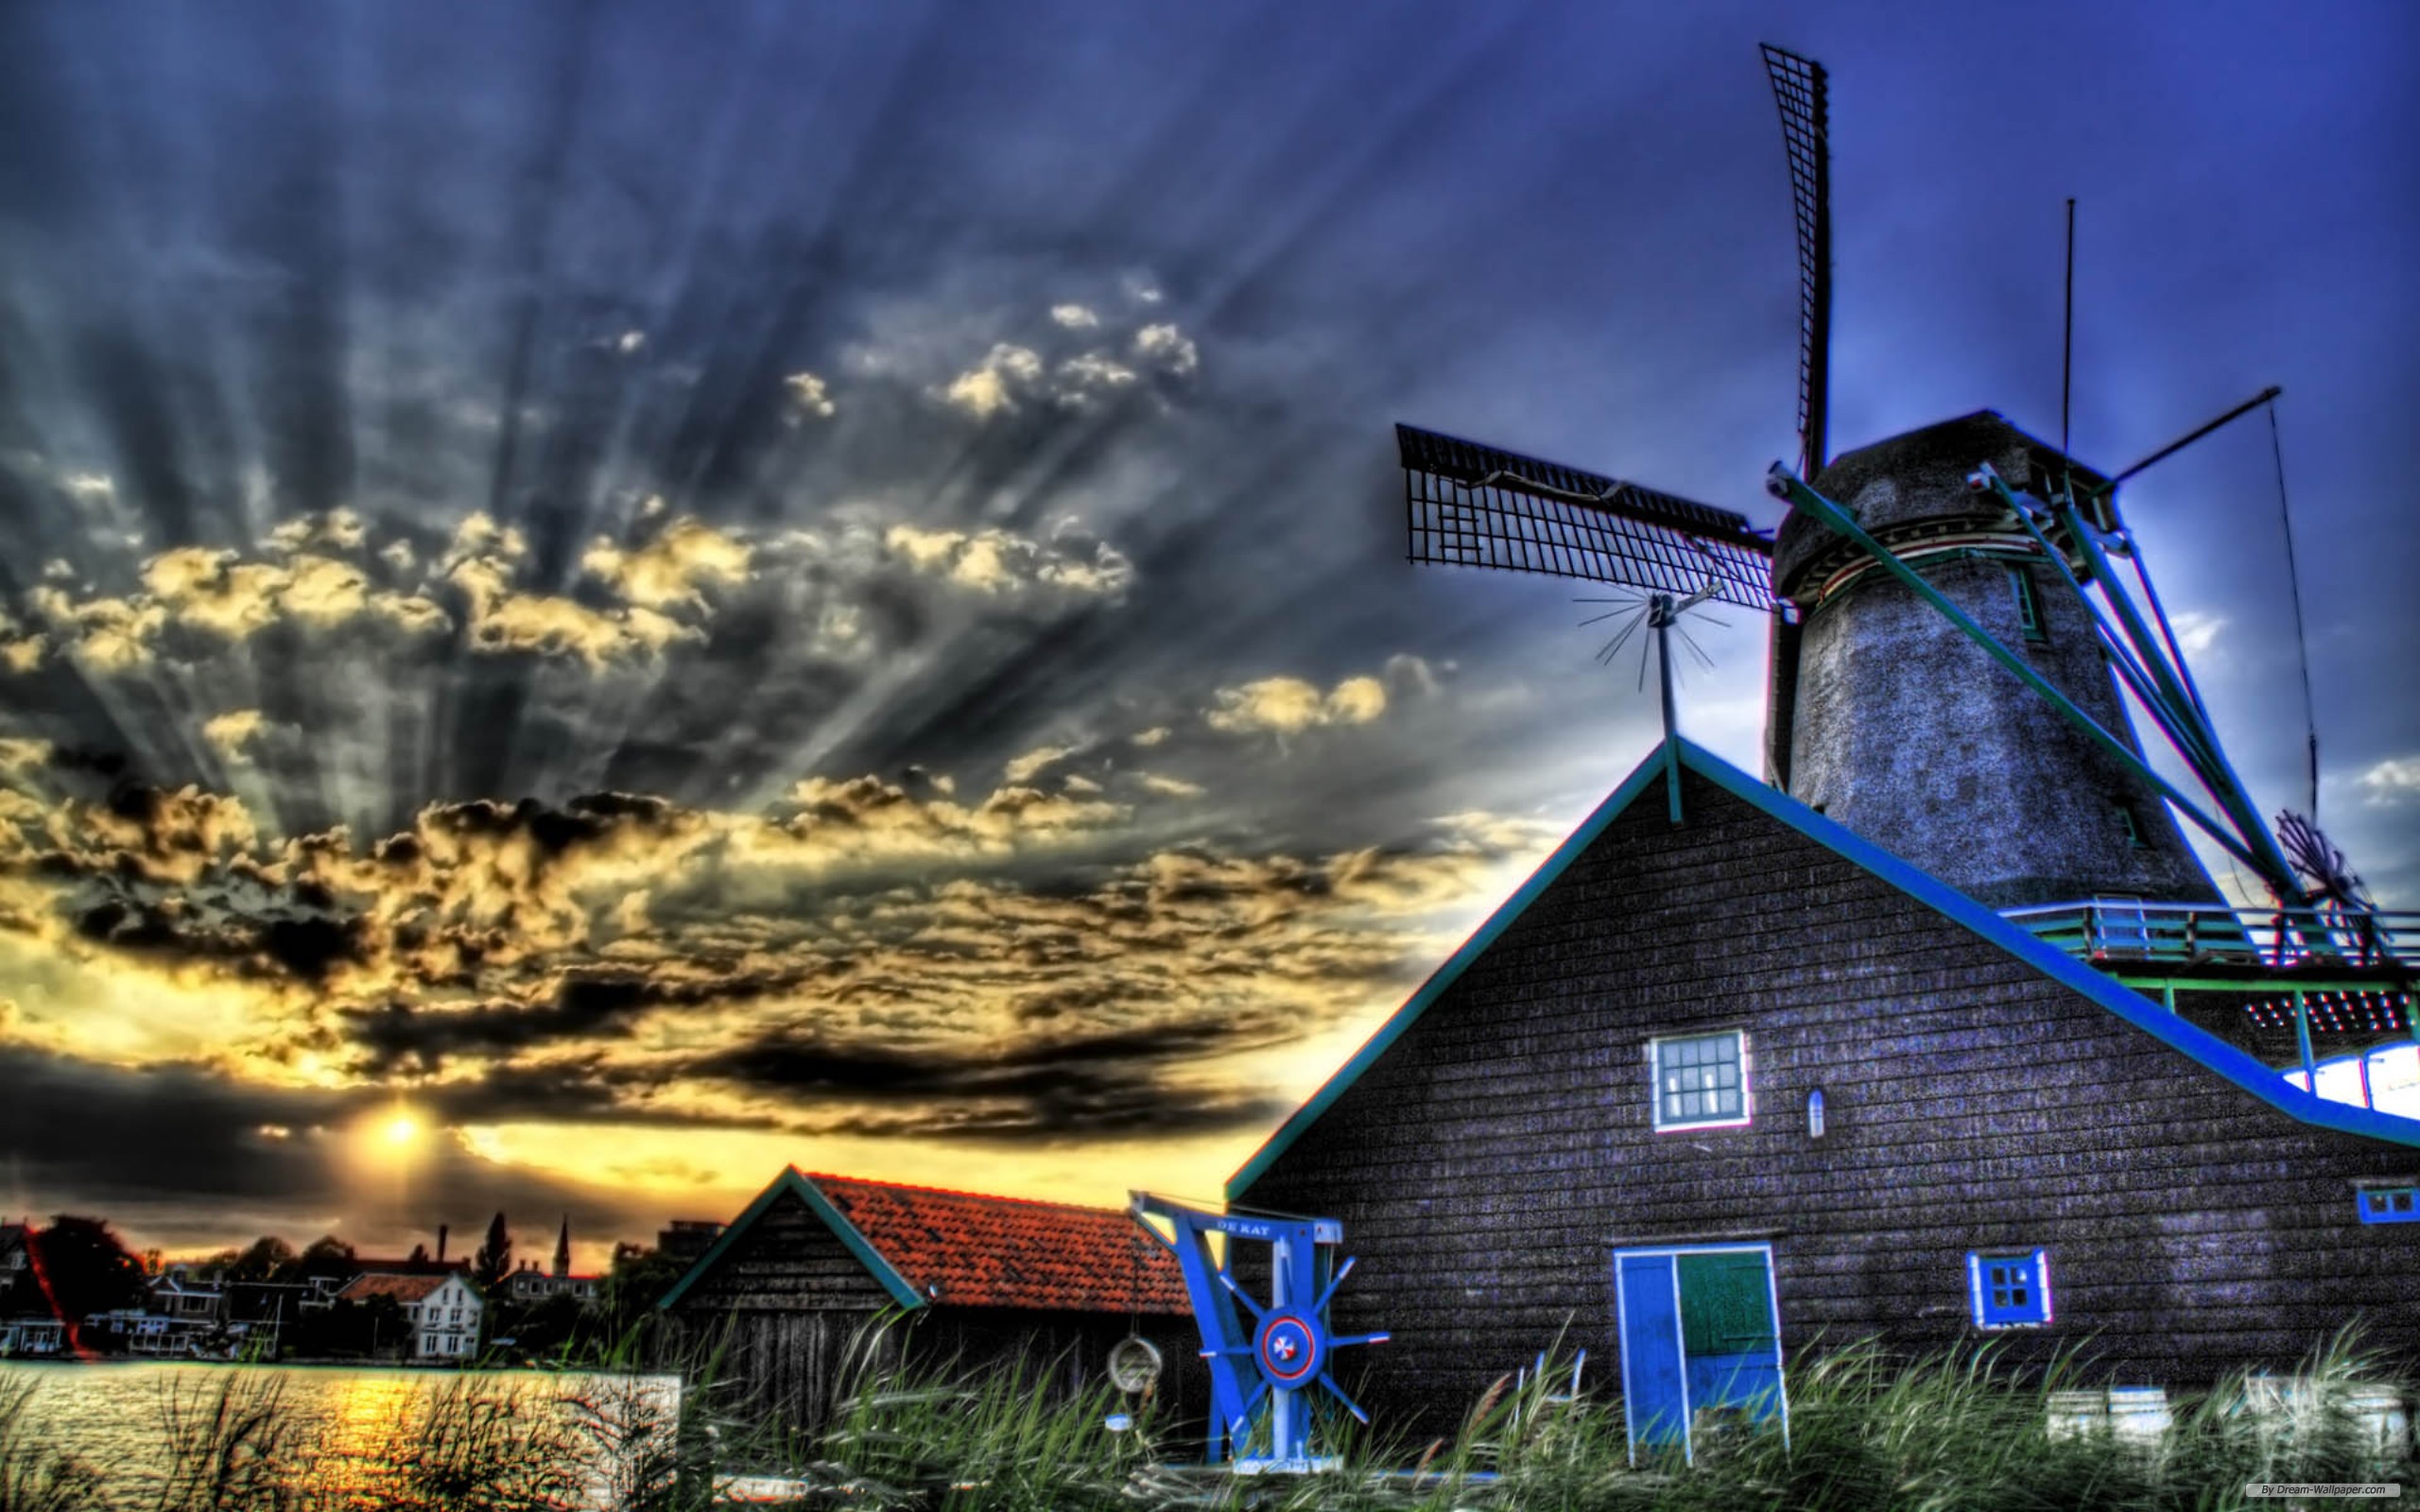 Surreal HDR photography of a windmill at sunset, with sunbeams shining through.